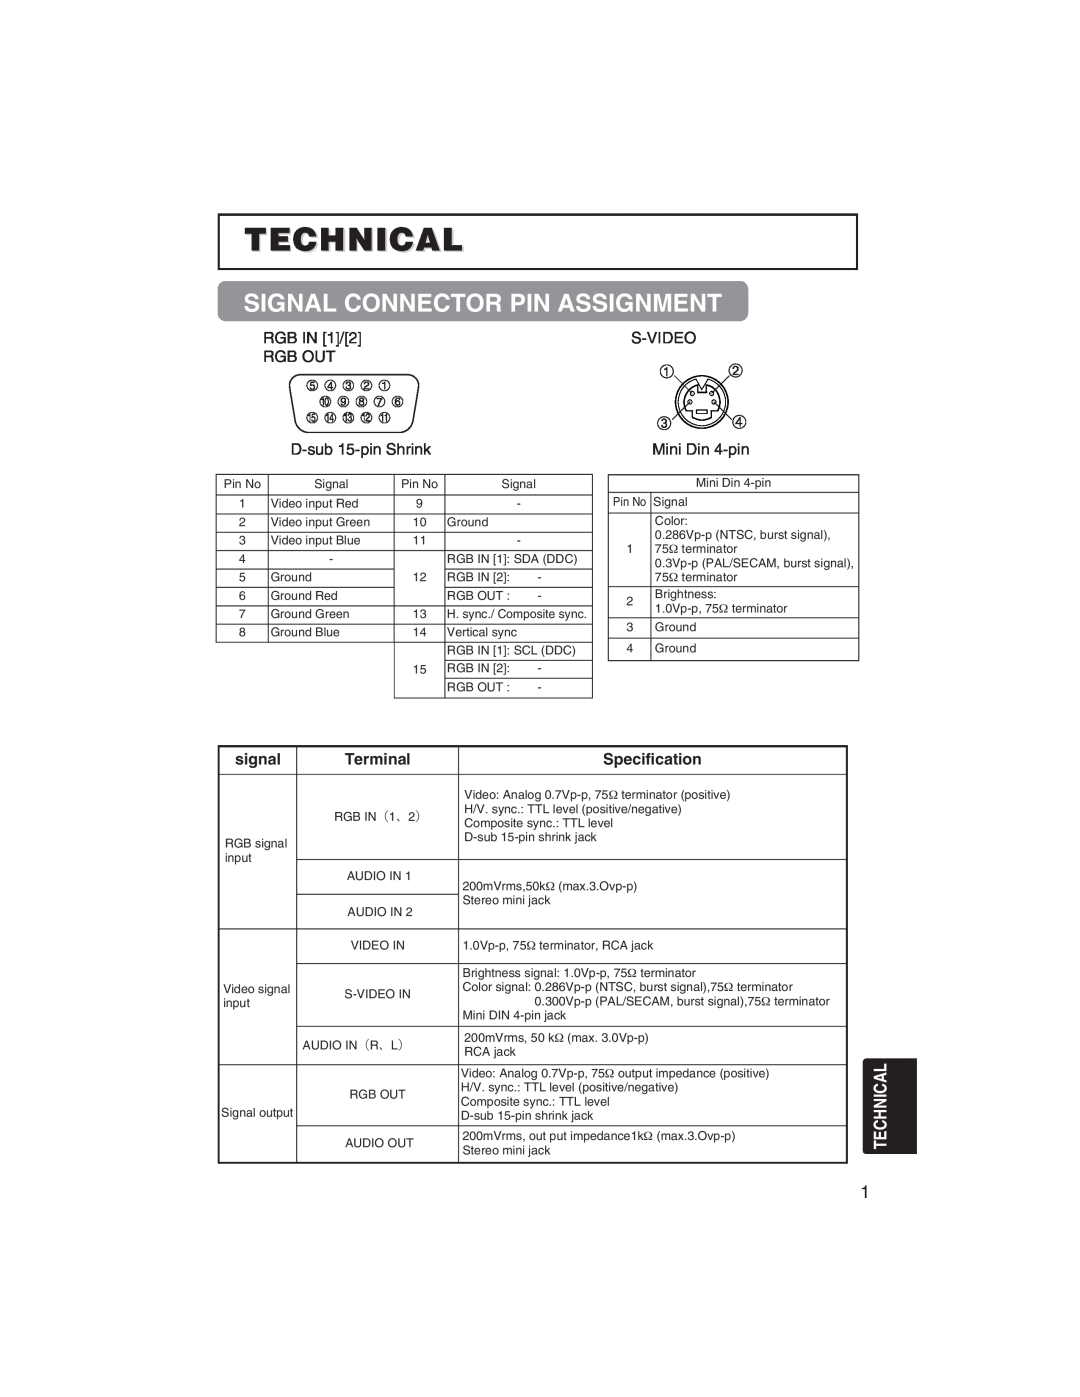 BOXLIGHT CP322ia user manual Technical, Signal Connector Pin Assignment, signal, Terminal, Specification 